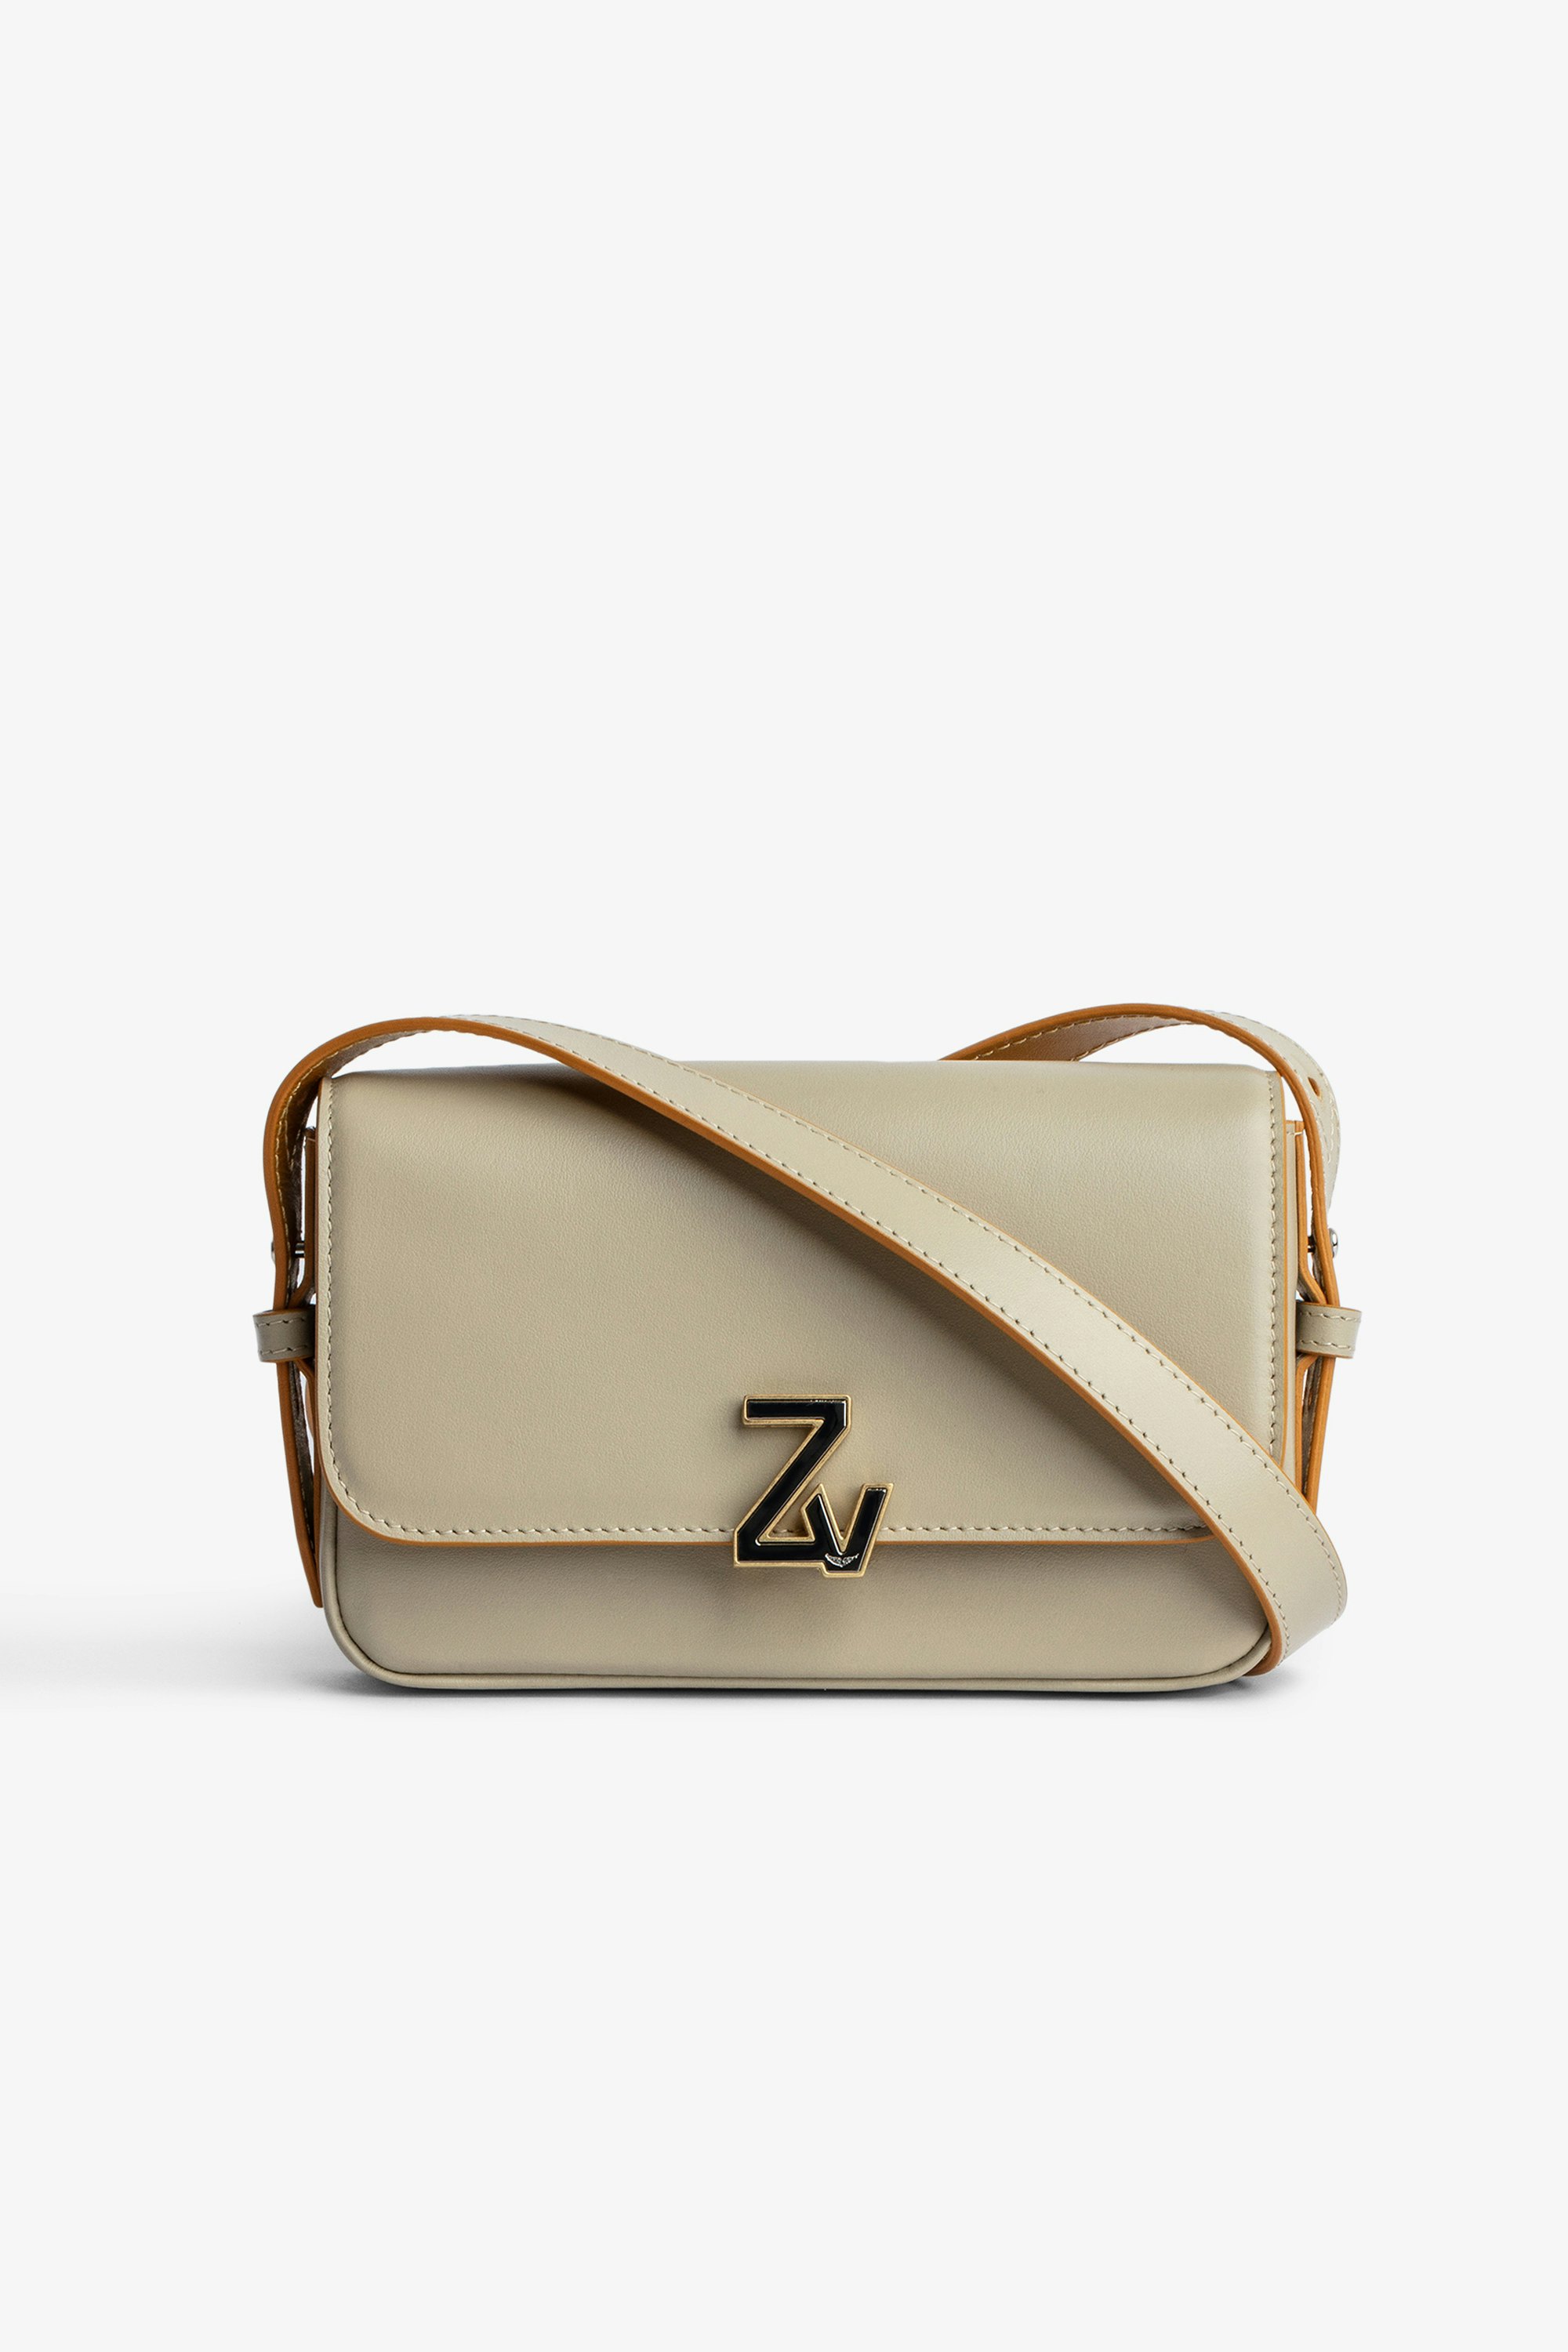 ZV Initiale Le Mini Bag Women’s small smooth beige leather bag with flap, ZV clasp and a shoulder strap